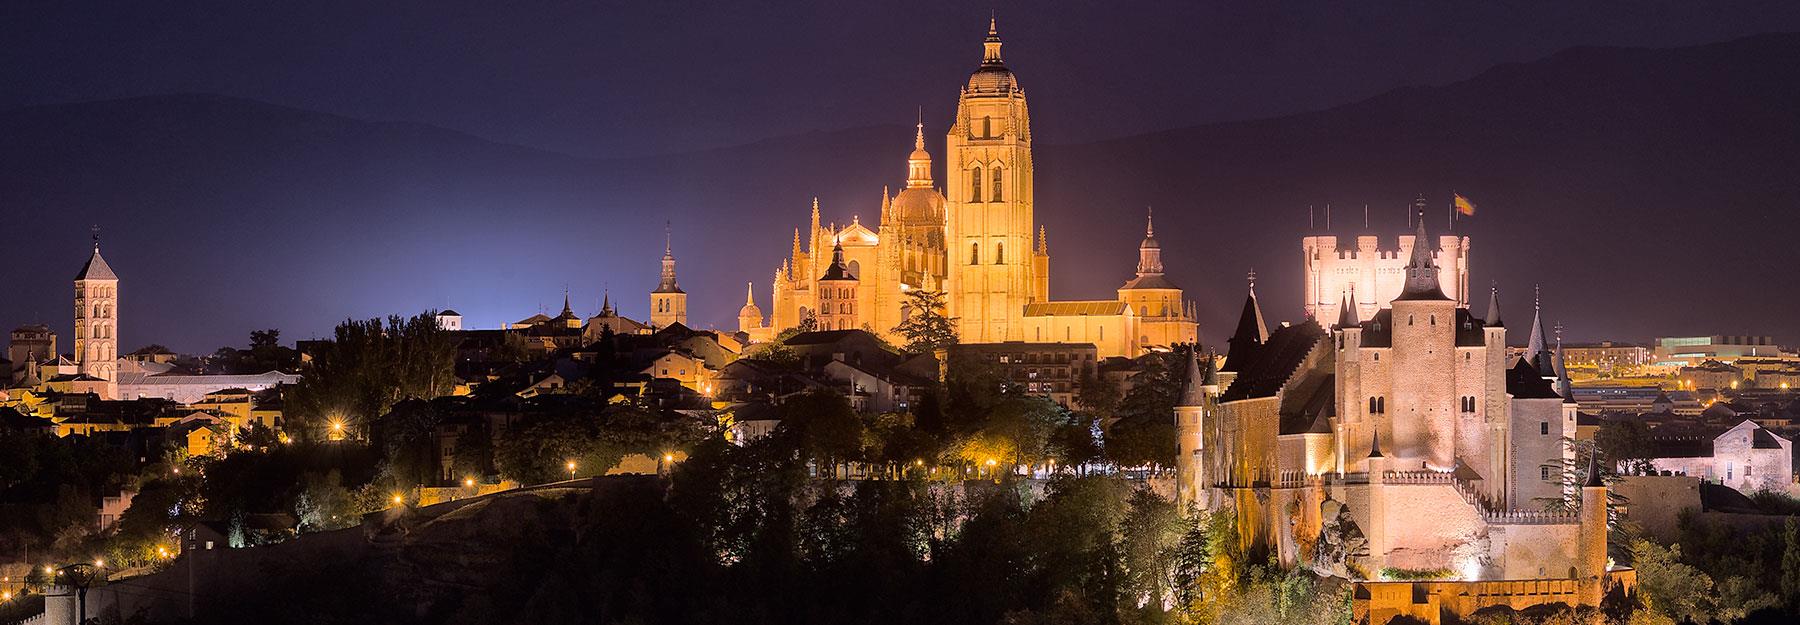 Segovia Legends and Mysteries Free Walking Tour